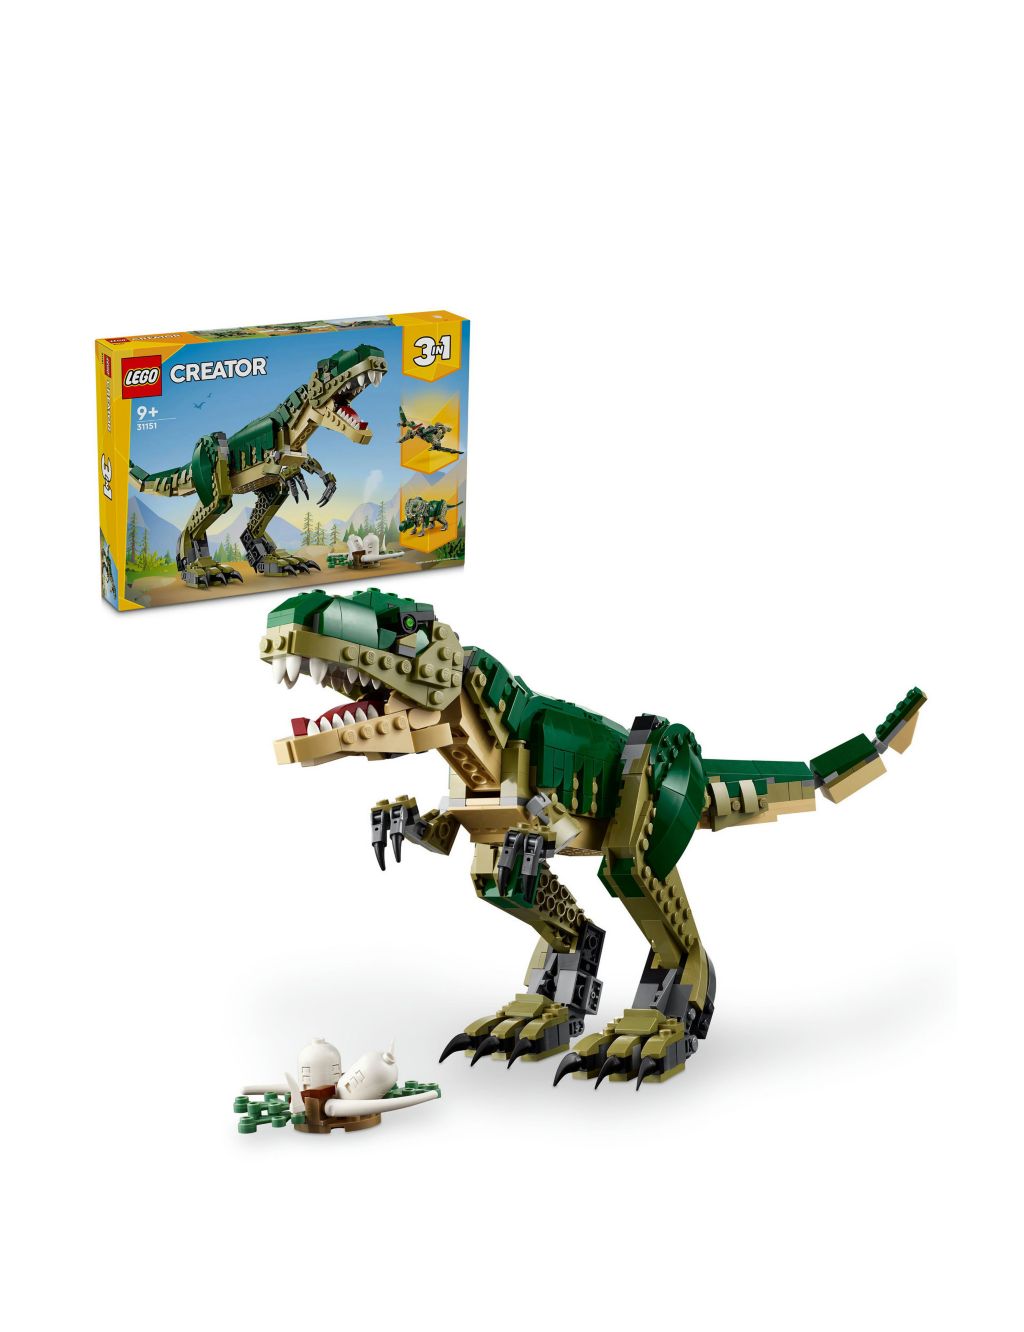 LEGO® Creator 3in1 T. rex, Dinosaur Toy for Kids 31151 (9+ Yrs)